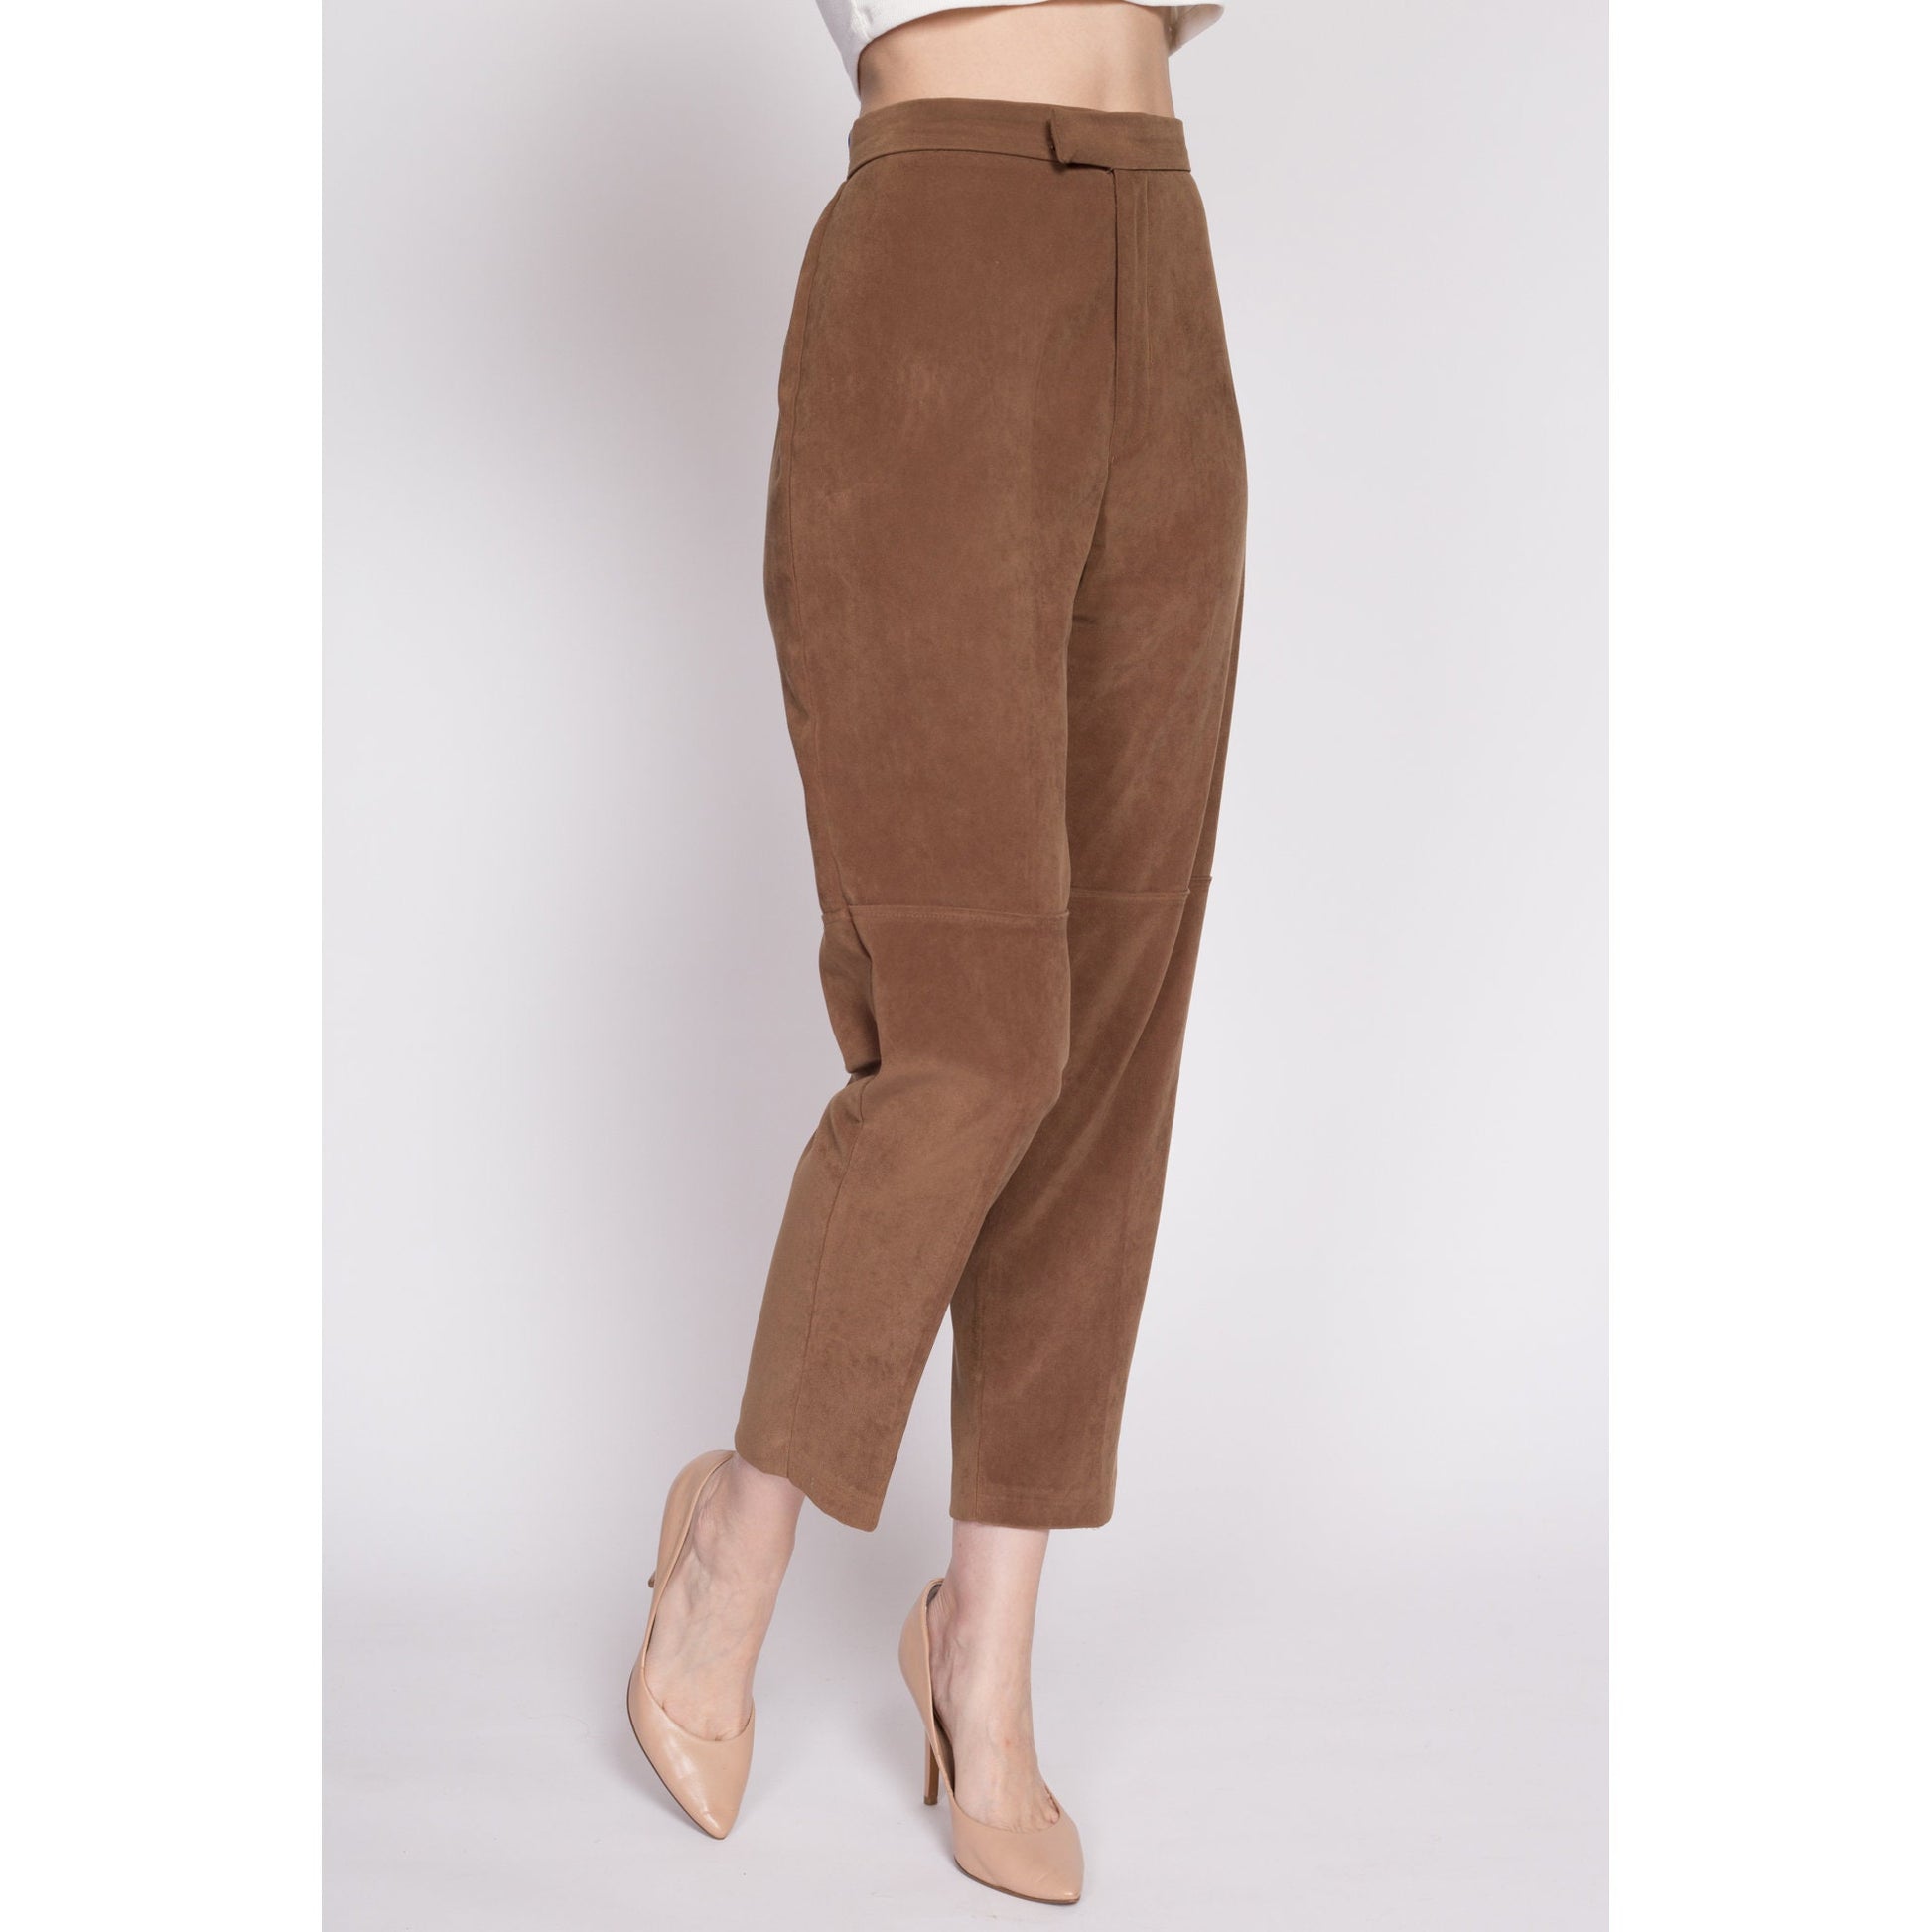 80s Brown Ultrasuede Trousers - Petite Medium, 28.5" | Vintage Faux Leather Tapered Leg Pants